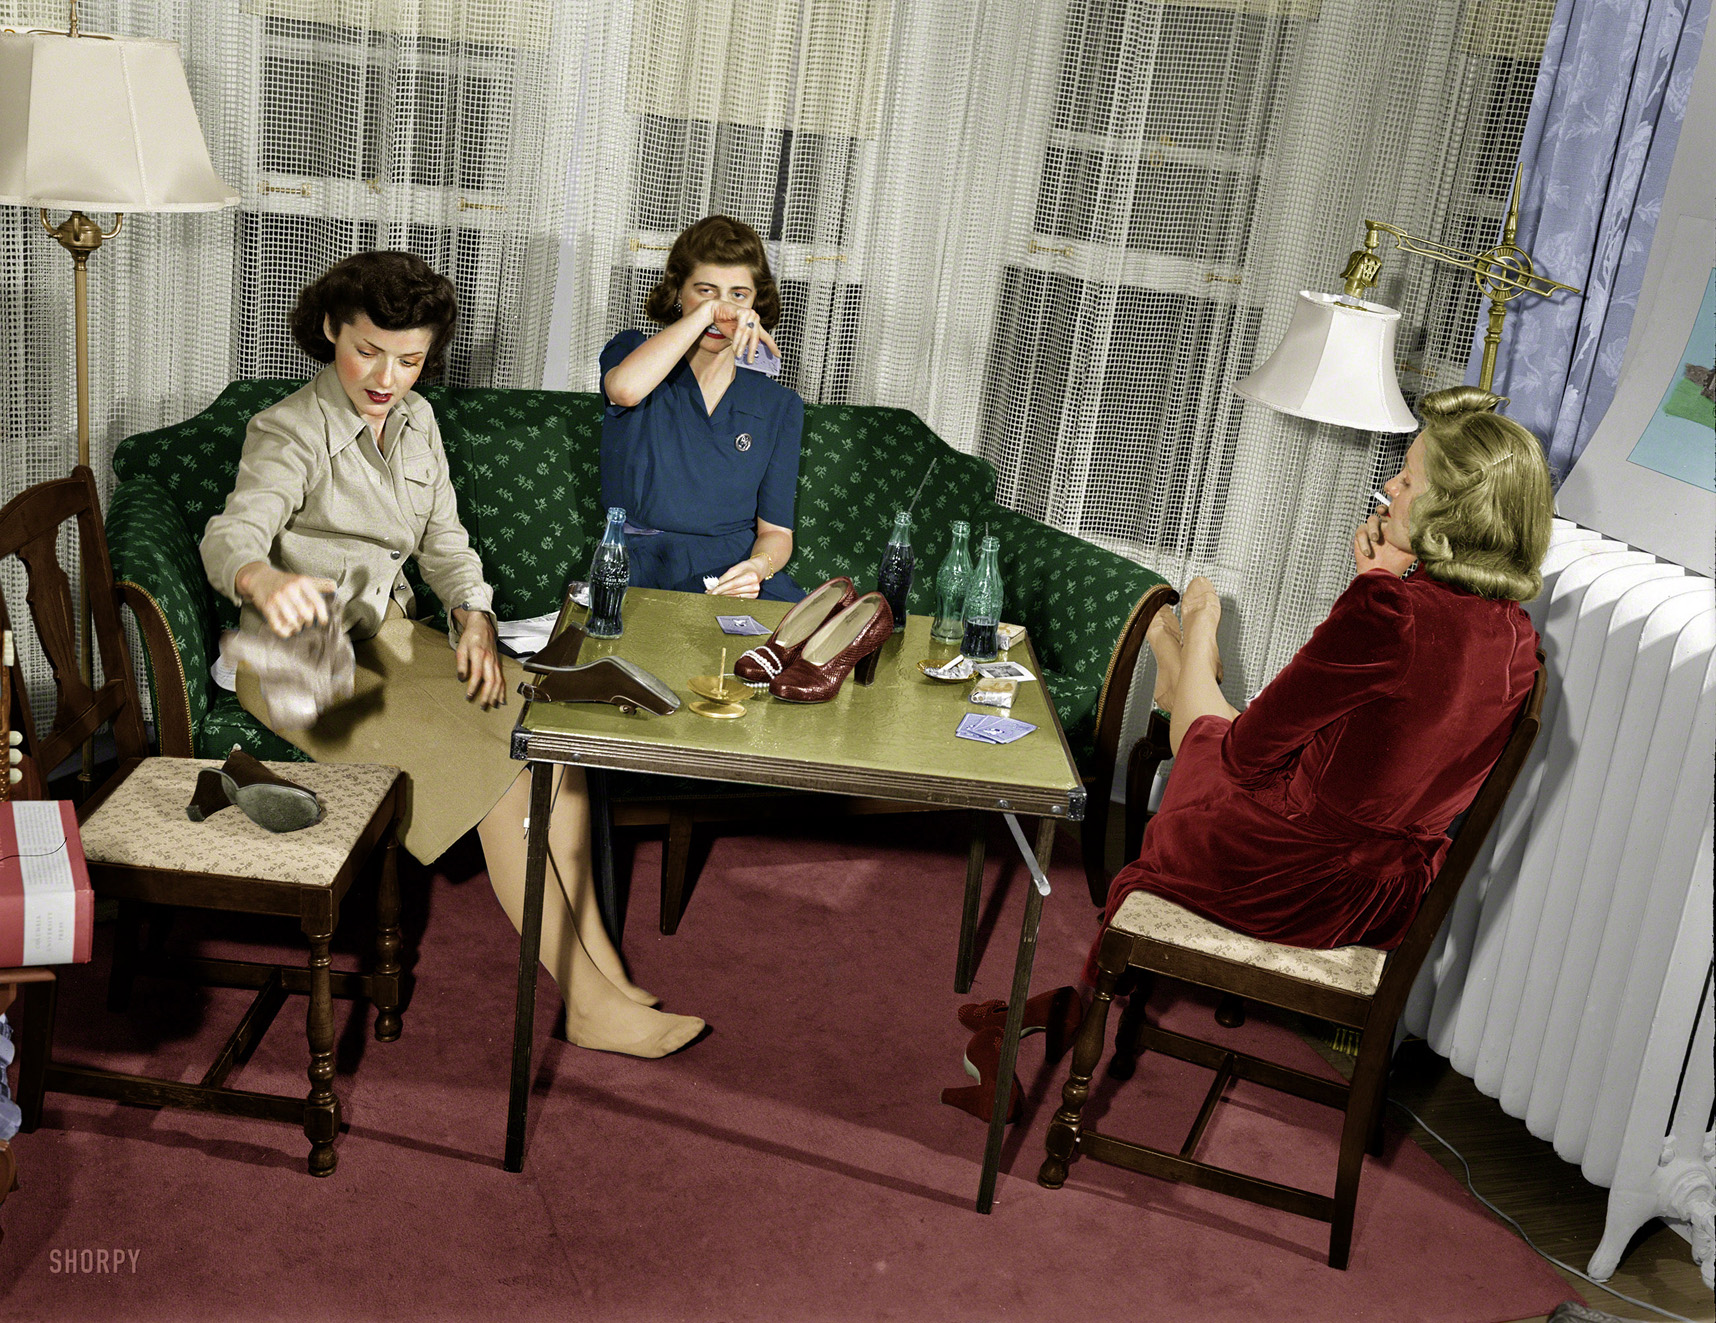 Colorized from this Shorpy original.  (I was 85% through the colorizing this pic when the next picture in the set was released... Well played Shorpy, well played!) View full size.